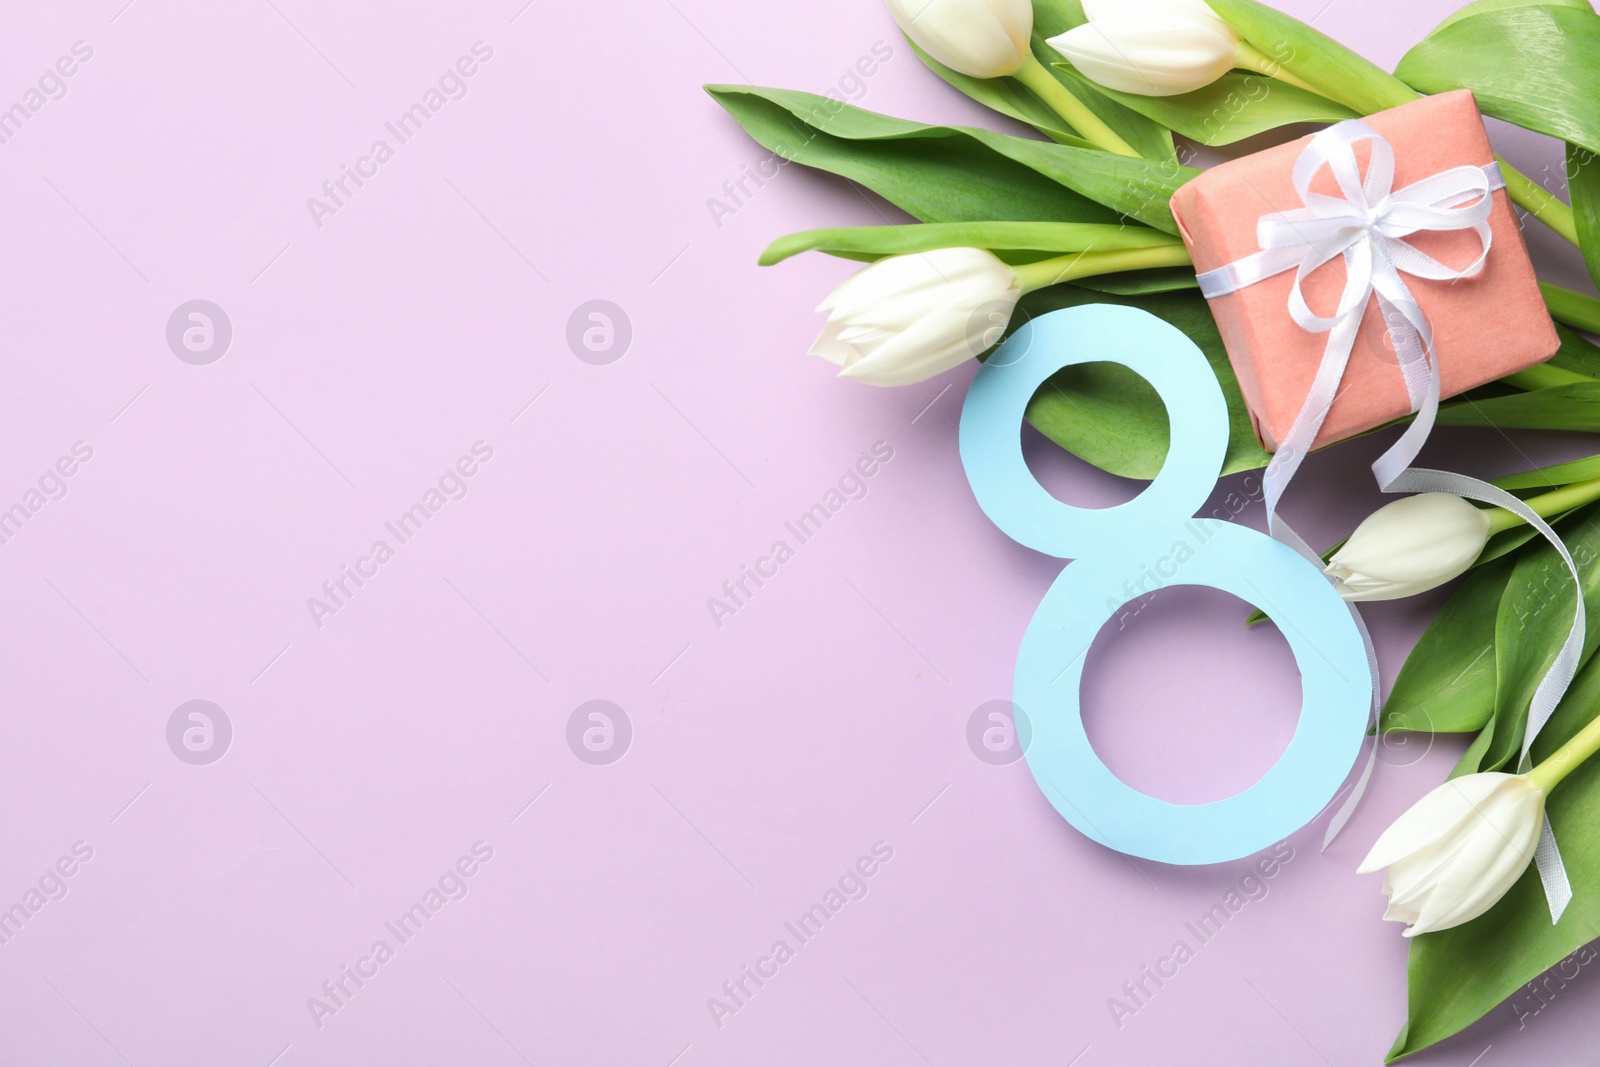 Photo of 8 March card design with tulips, gift and space for text on violet background, flat lay. International Women's Day